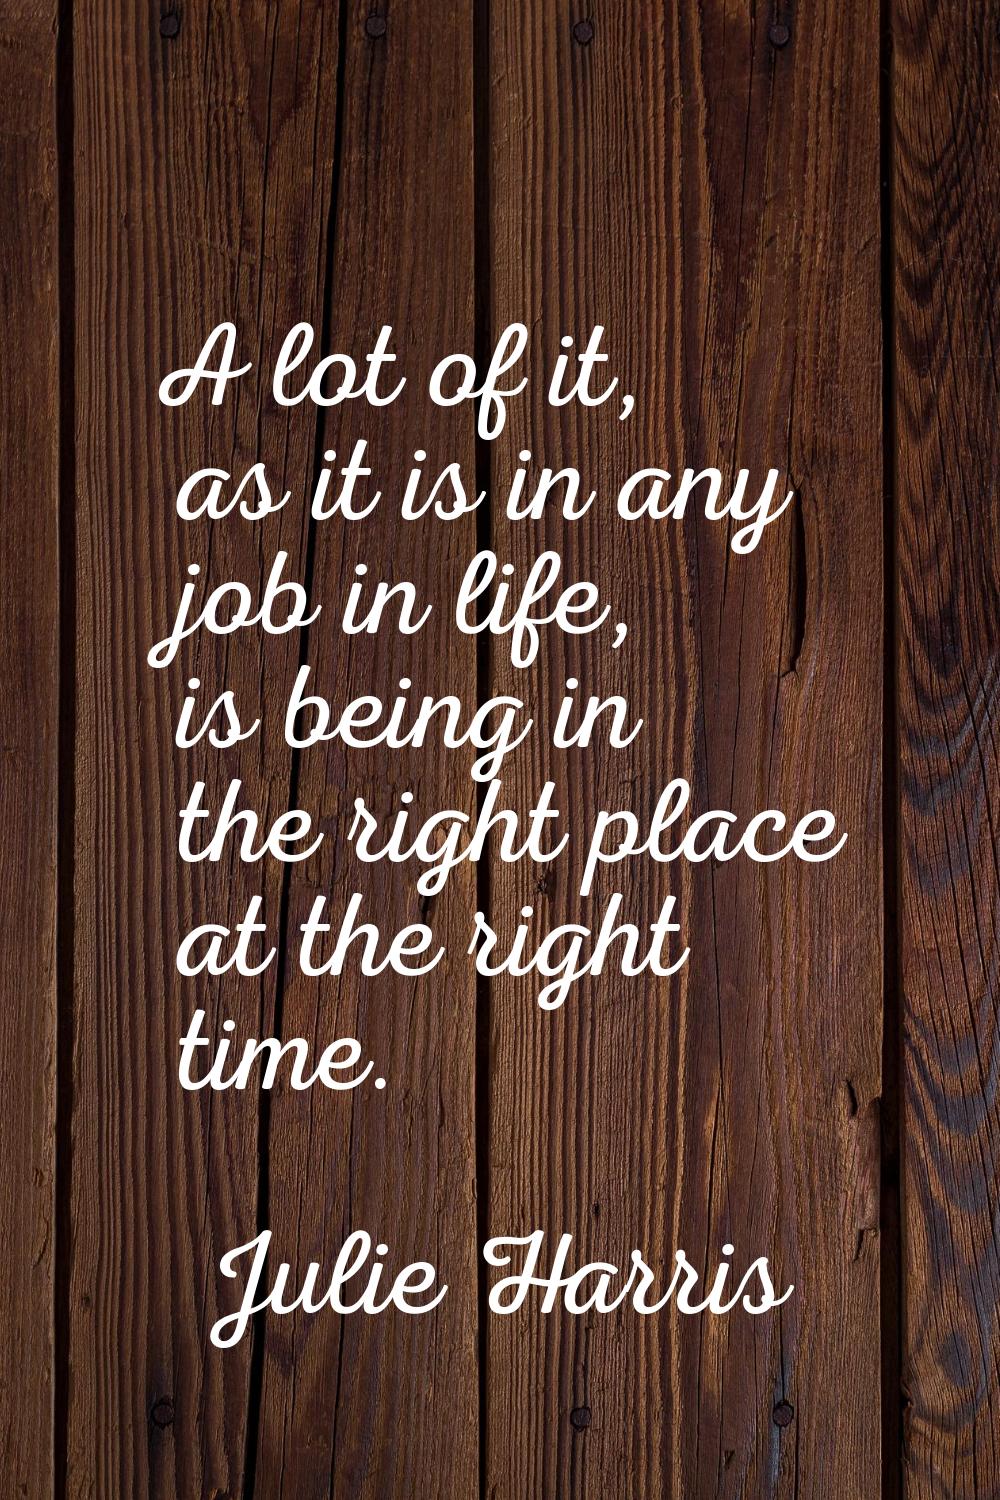 A lot of it, as it is in any job in life, is being in the right place at the right time.